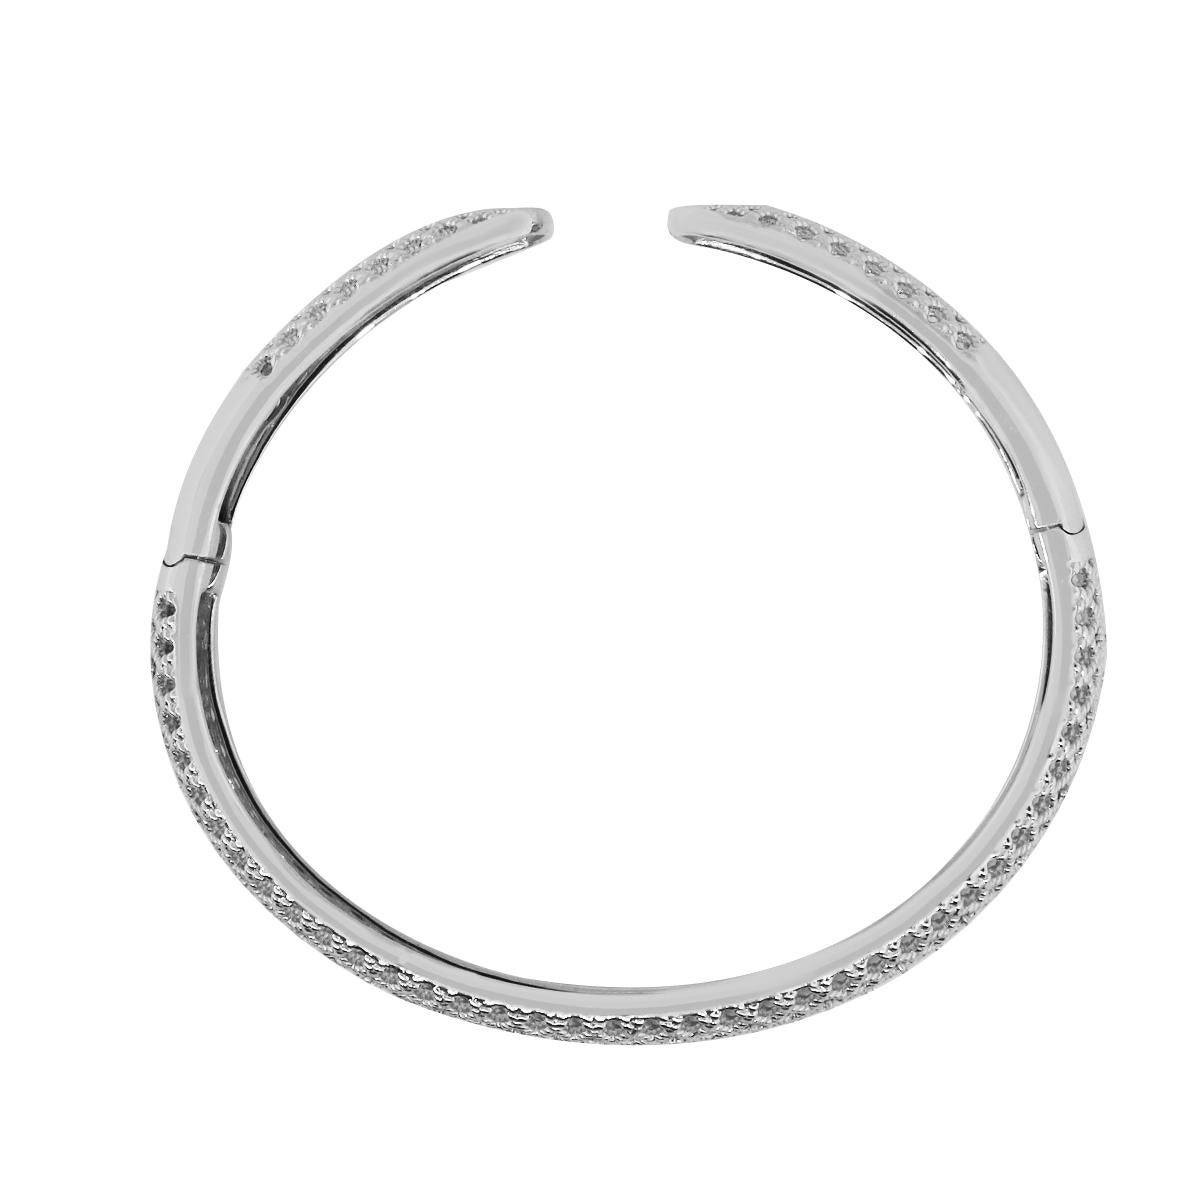 
Material: 14k White Gold
Diamond Details: Approximately 0.72ctw of round brilliant diamonds. Diamonds are G/H in color and SI in clarity
Wrist size: Will fit up to a 7″ wrist
Measurements: 0.45″ in width
Total Weight: 30.4g (19.5dwt)
SKU: A30312708